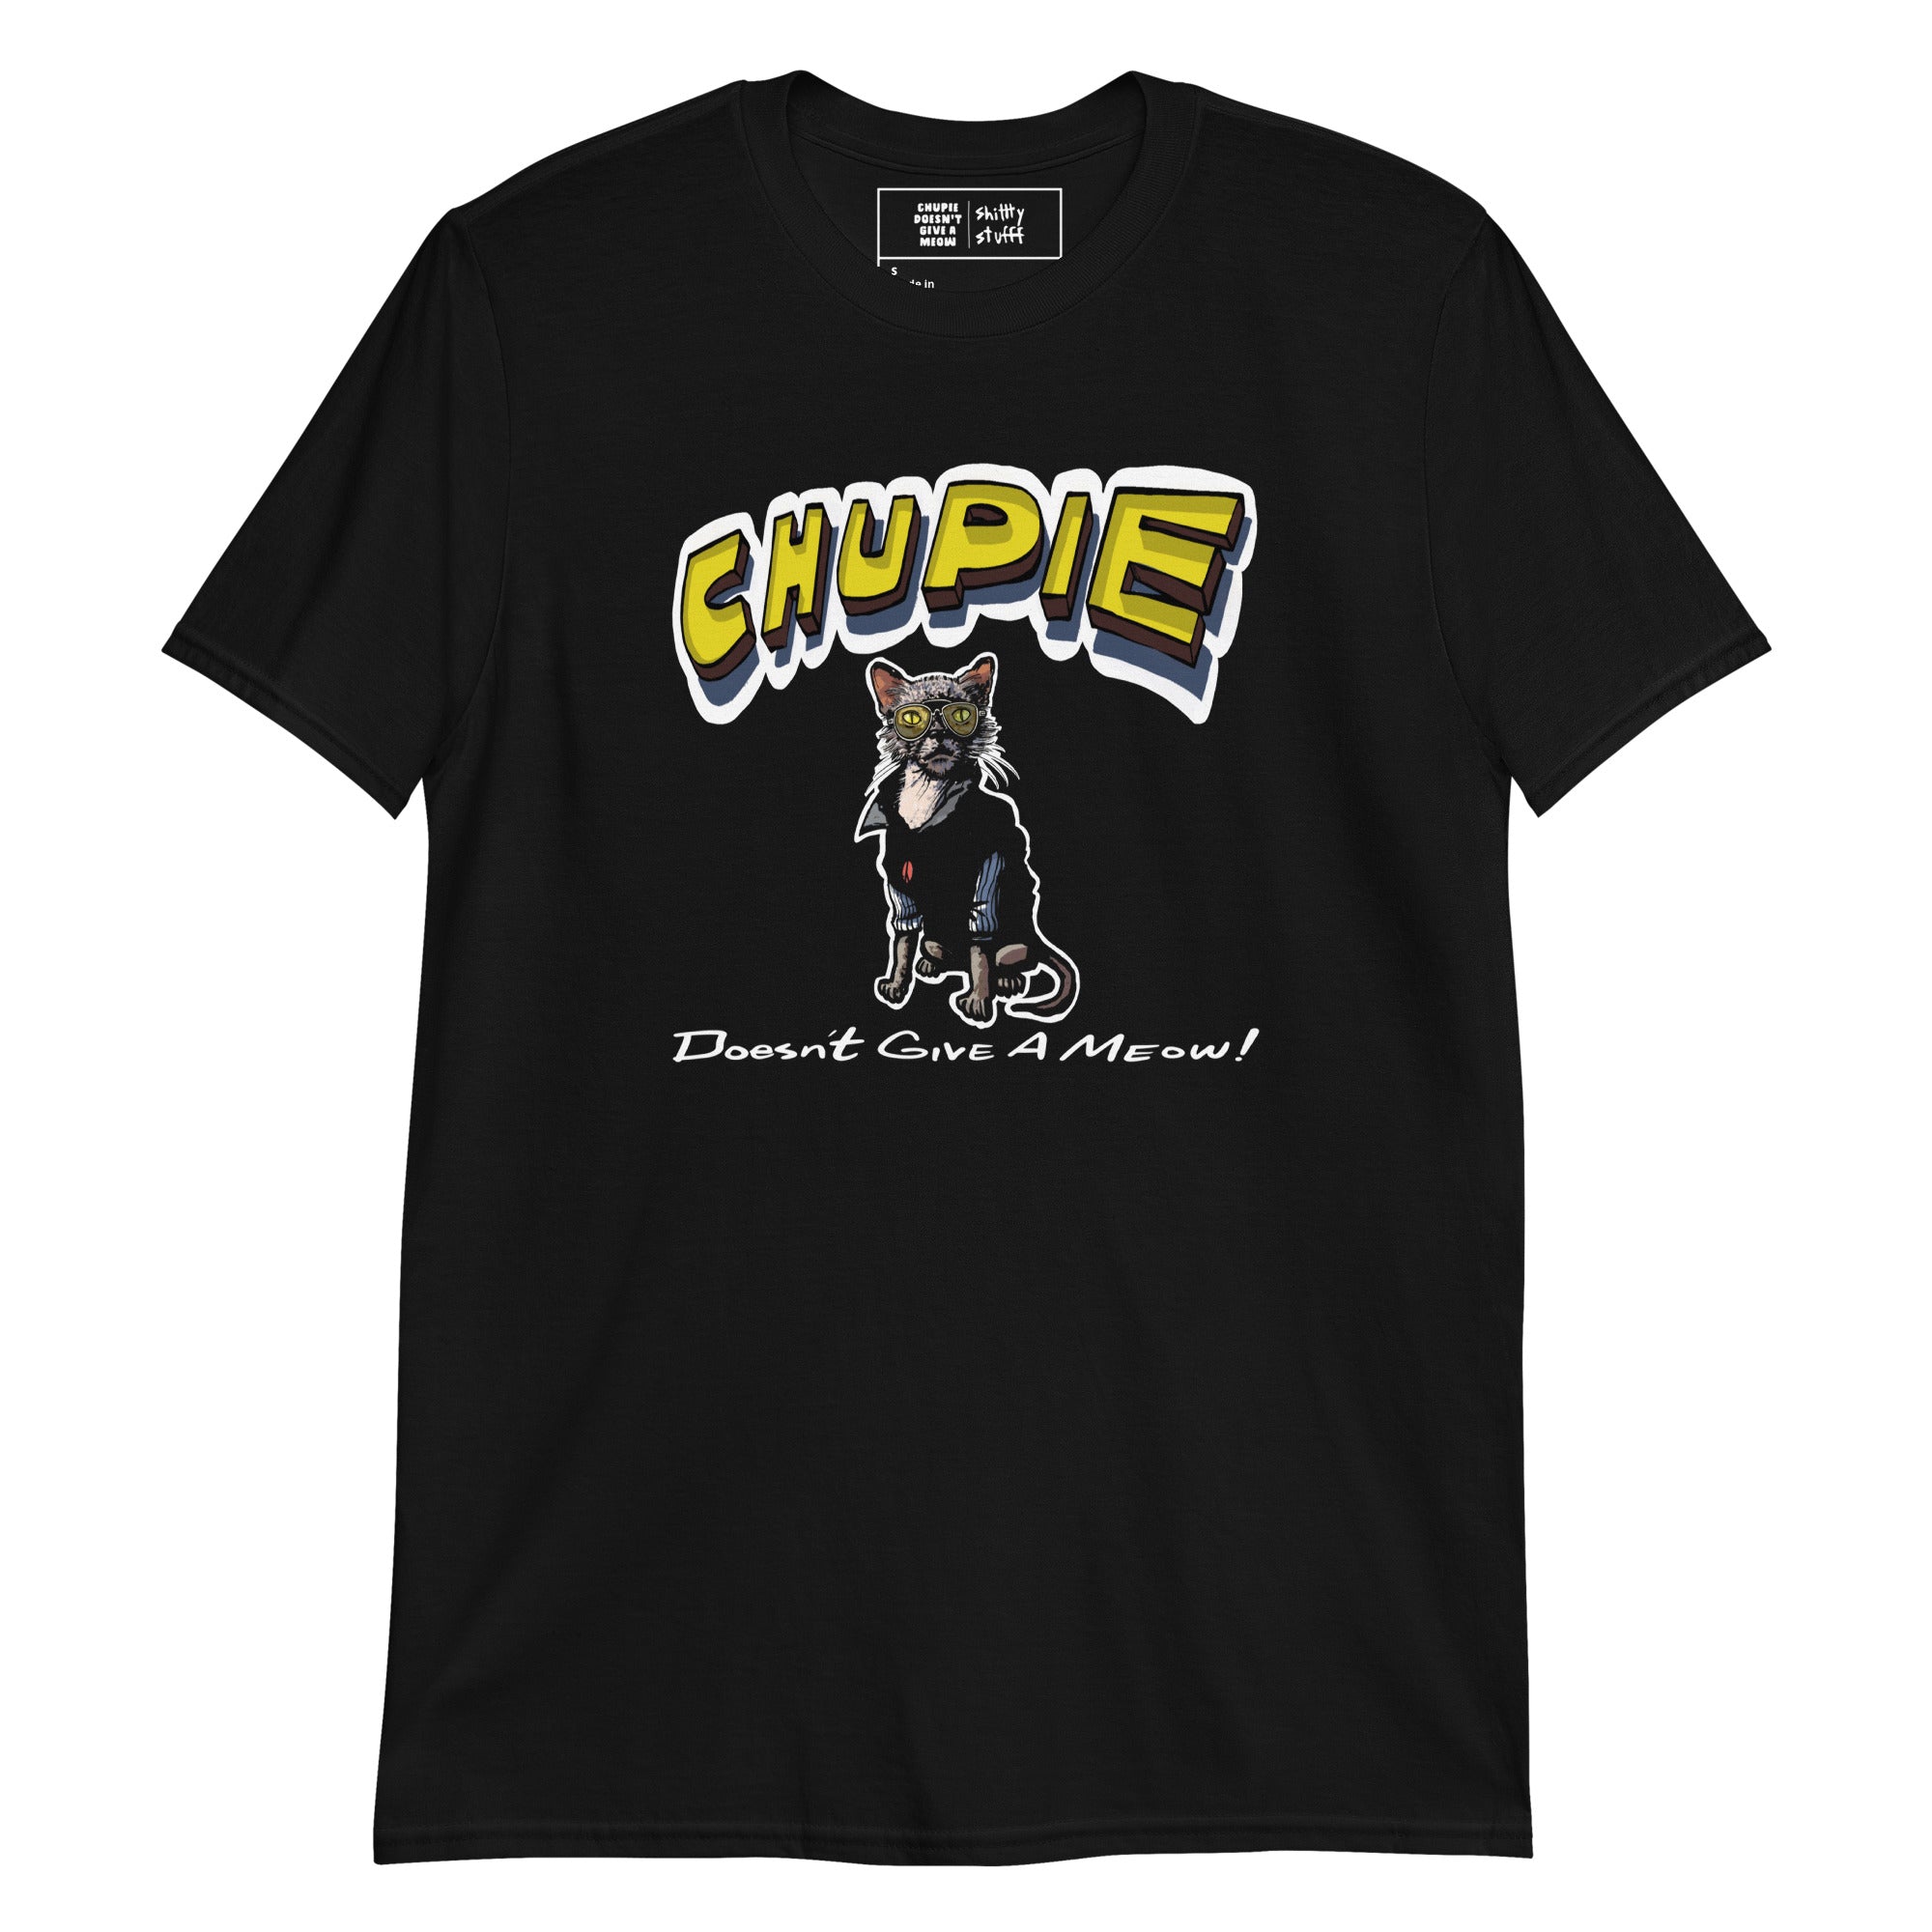 Chupie Doesn't Give A Meow Shirt